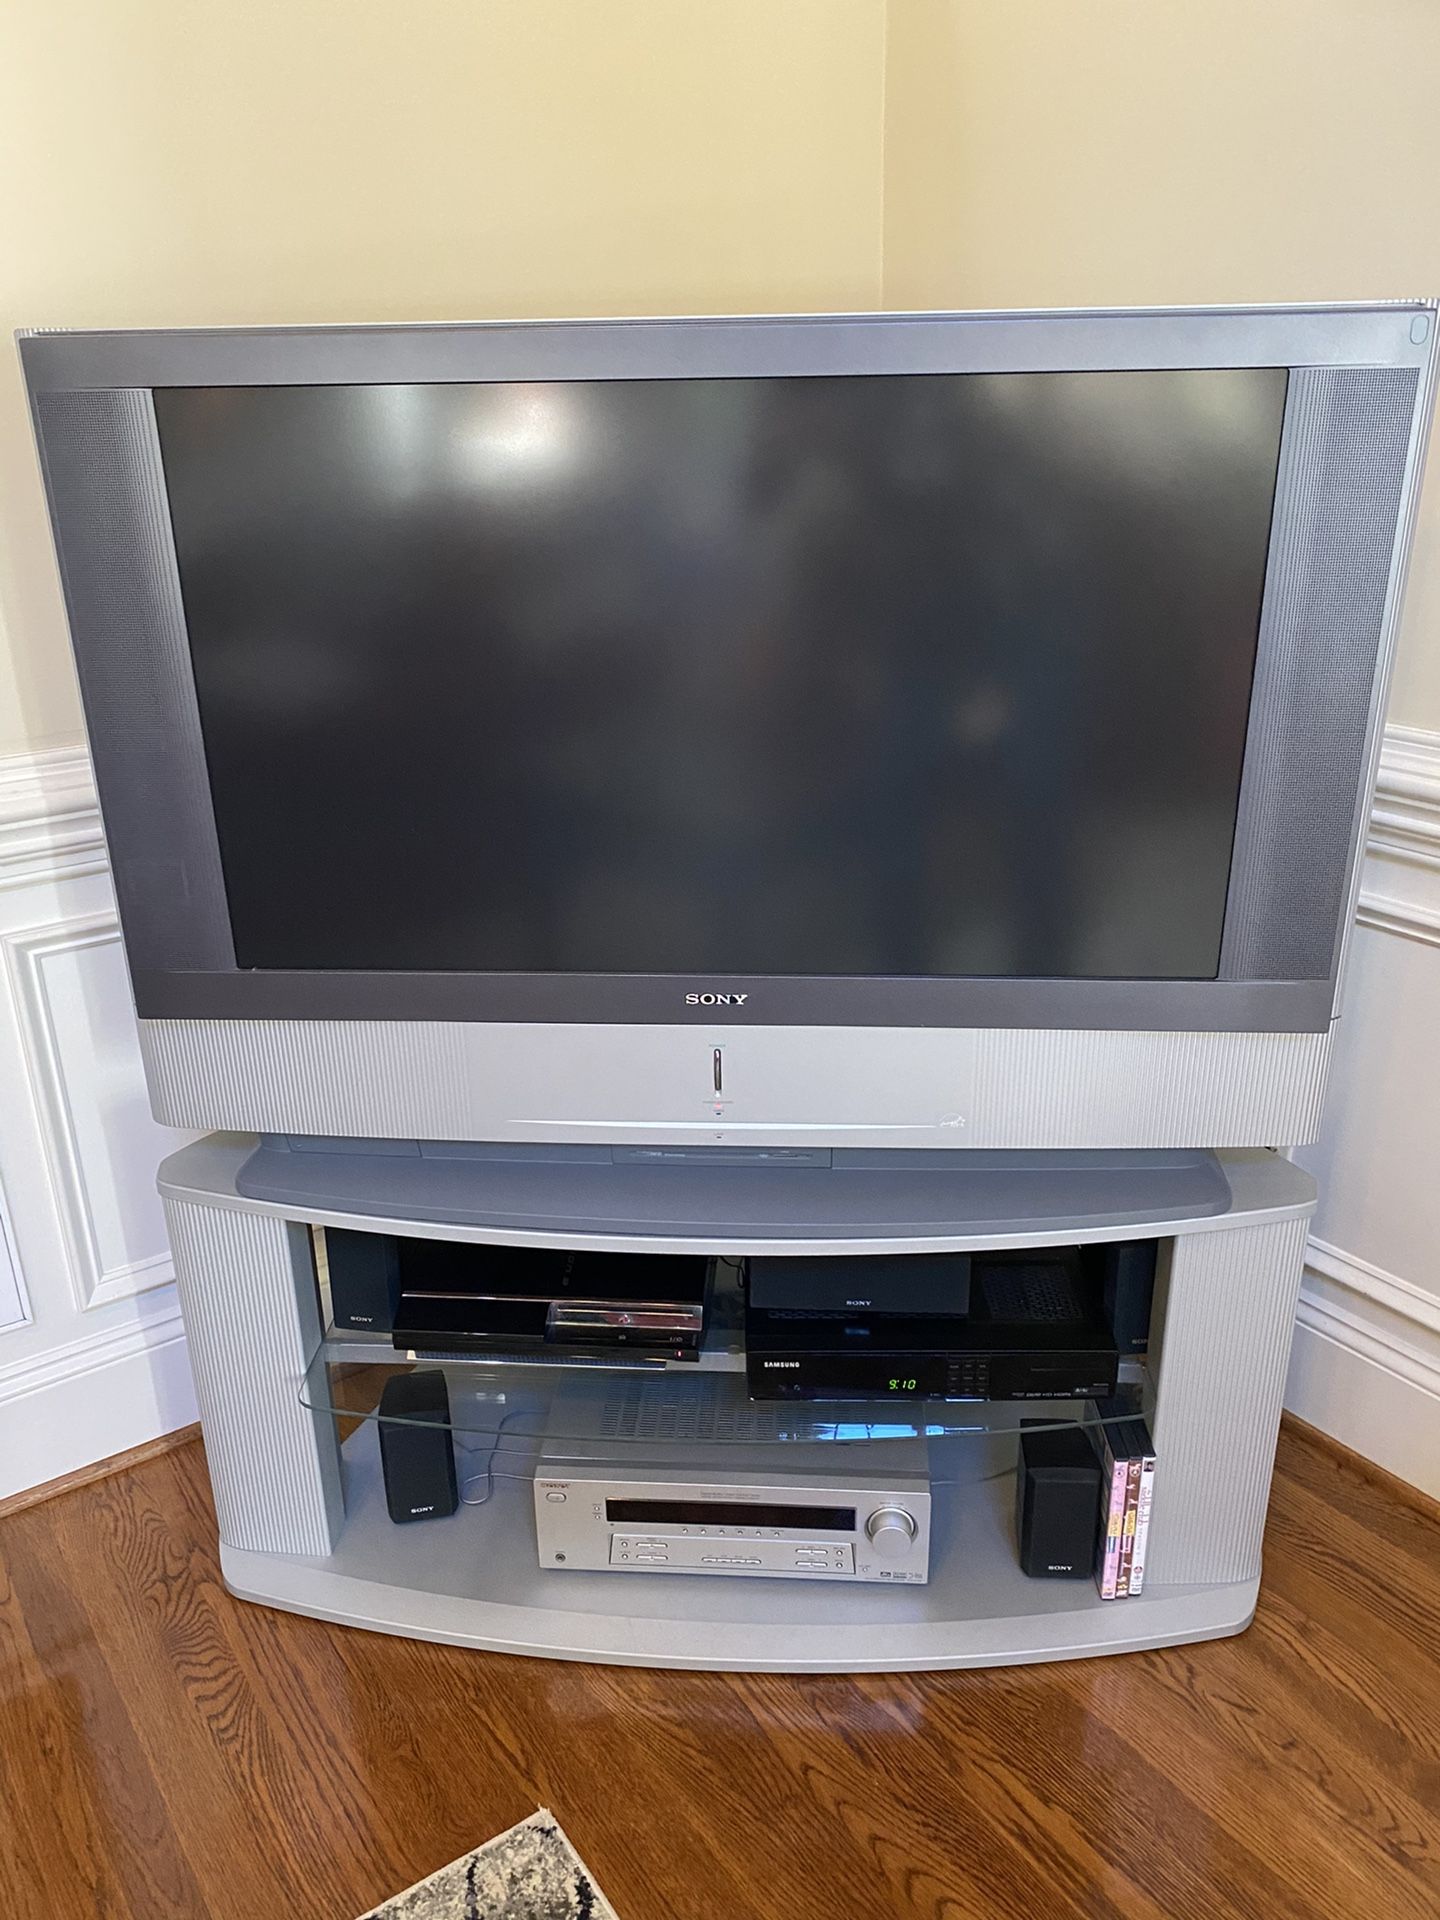 FREE 42” tv with stand, receiver, surround sound